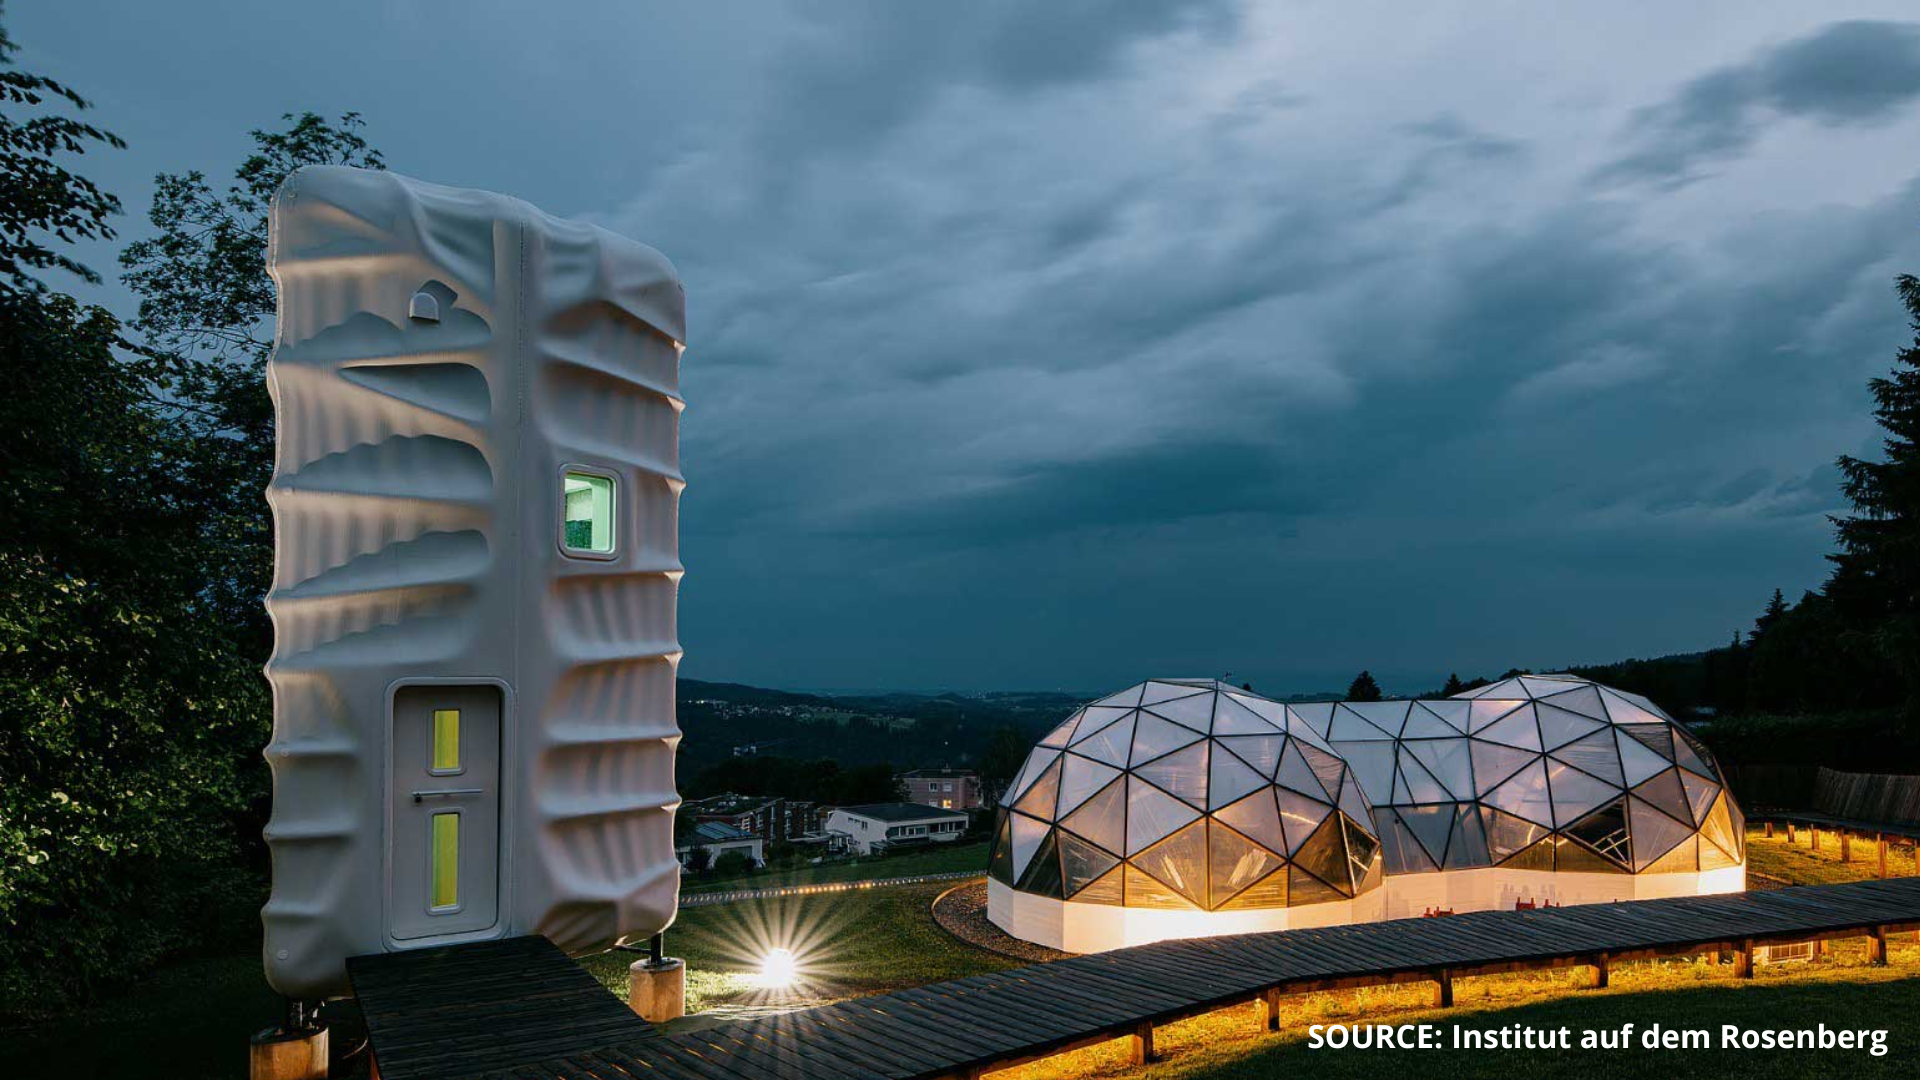 Institut auf dem Rosenberg and SAGA Space Architects unveiled the world's tallest 3D printed space habitat, an extraterrestrial learning environment